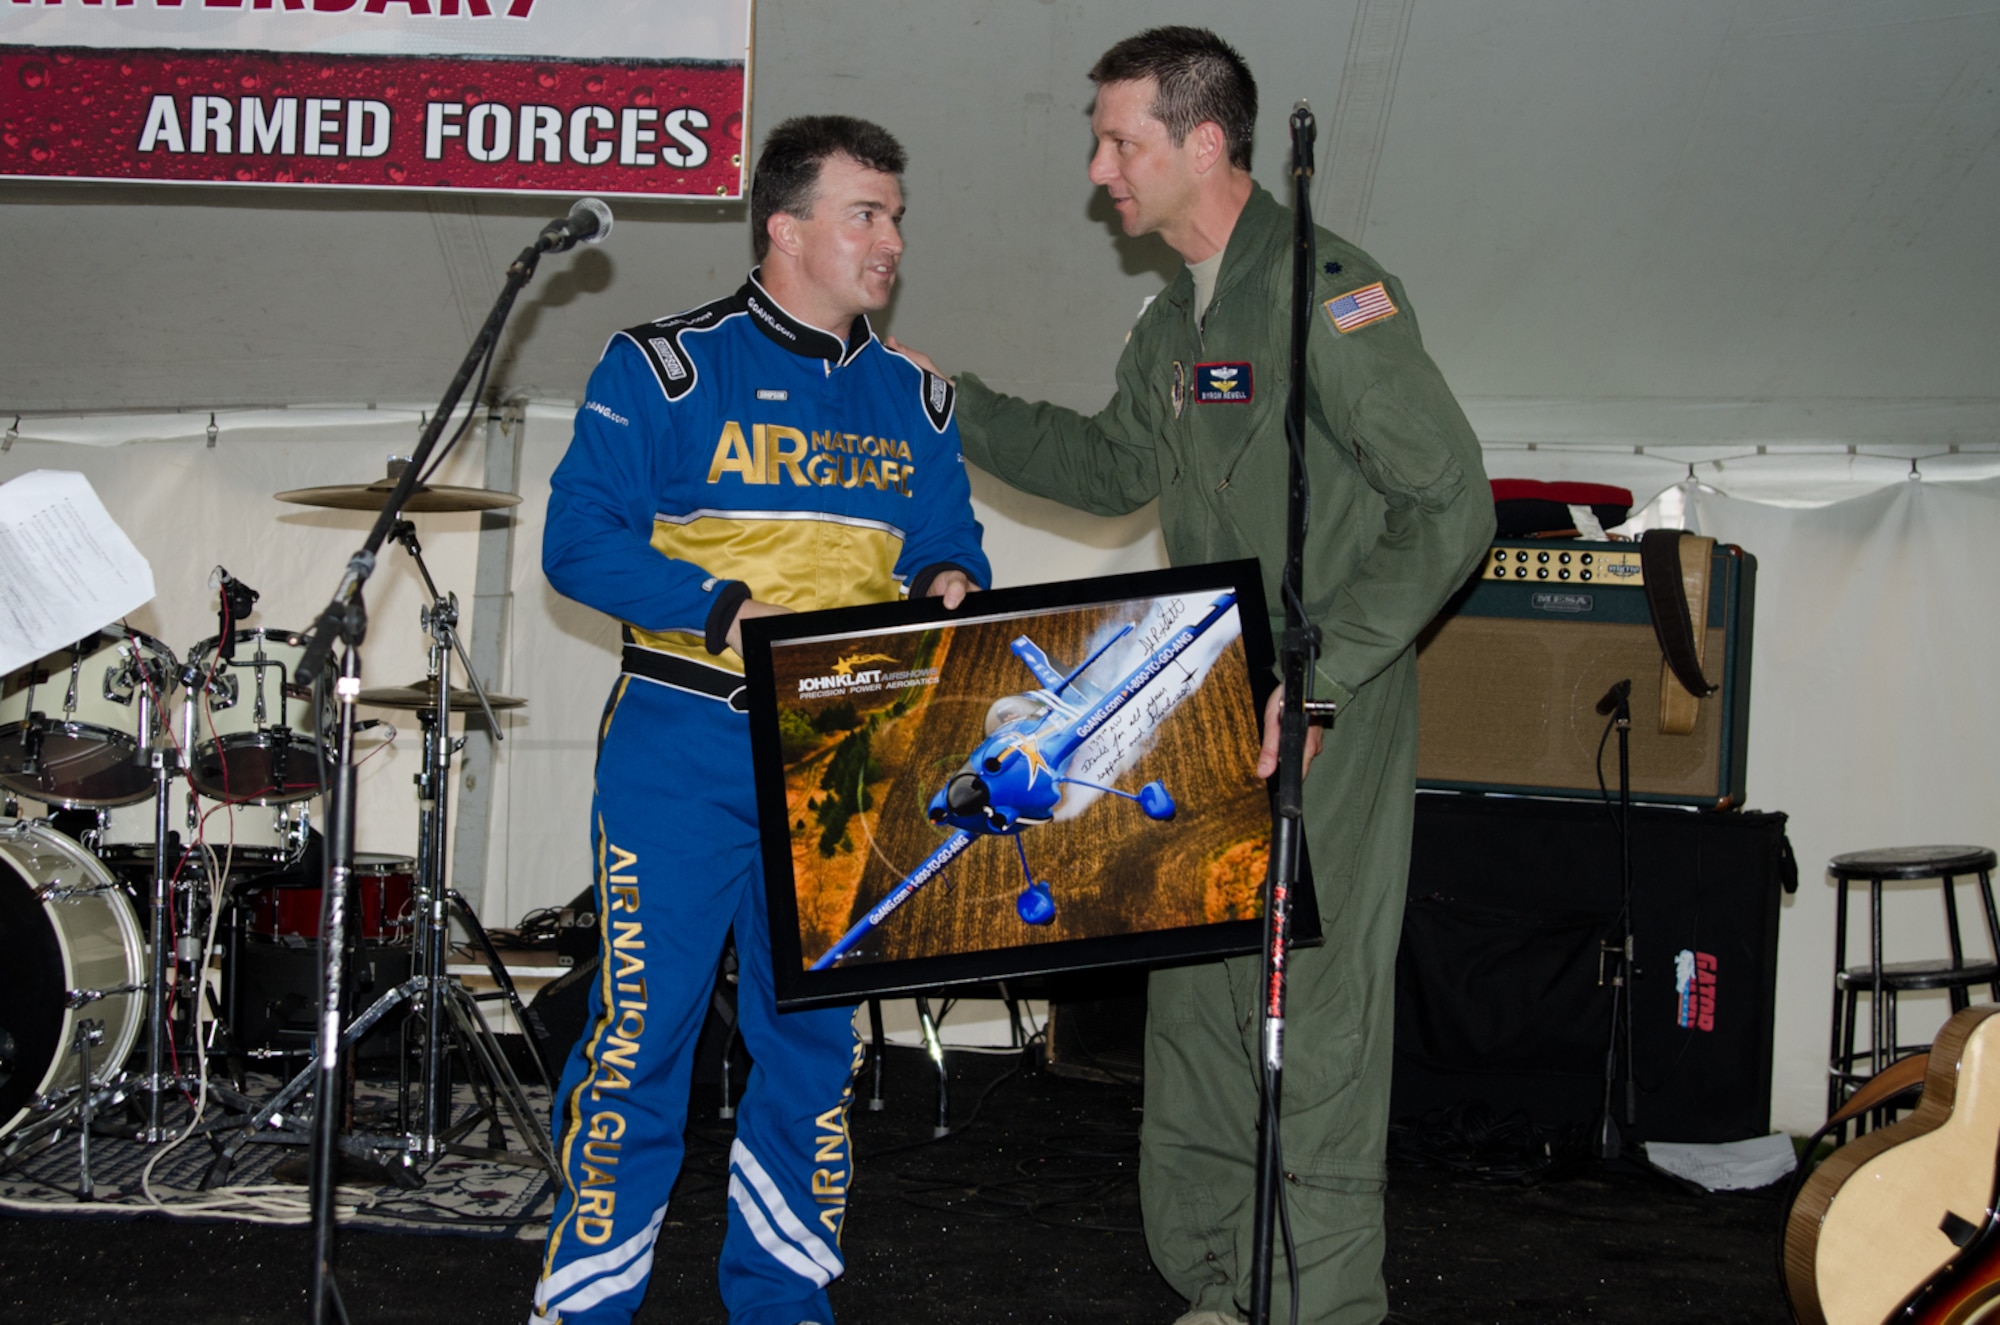 John Klatt, an aerobatics pilot for the Air National Guard, presents Lt. Col. Byron Newell, the Sound of Speed Airshow coordinator, with a photo May 4, 2012 in St. Joseph, Mo. (Photo by Staff Sgt. Michael Crane/Missouri Air National Guard)